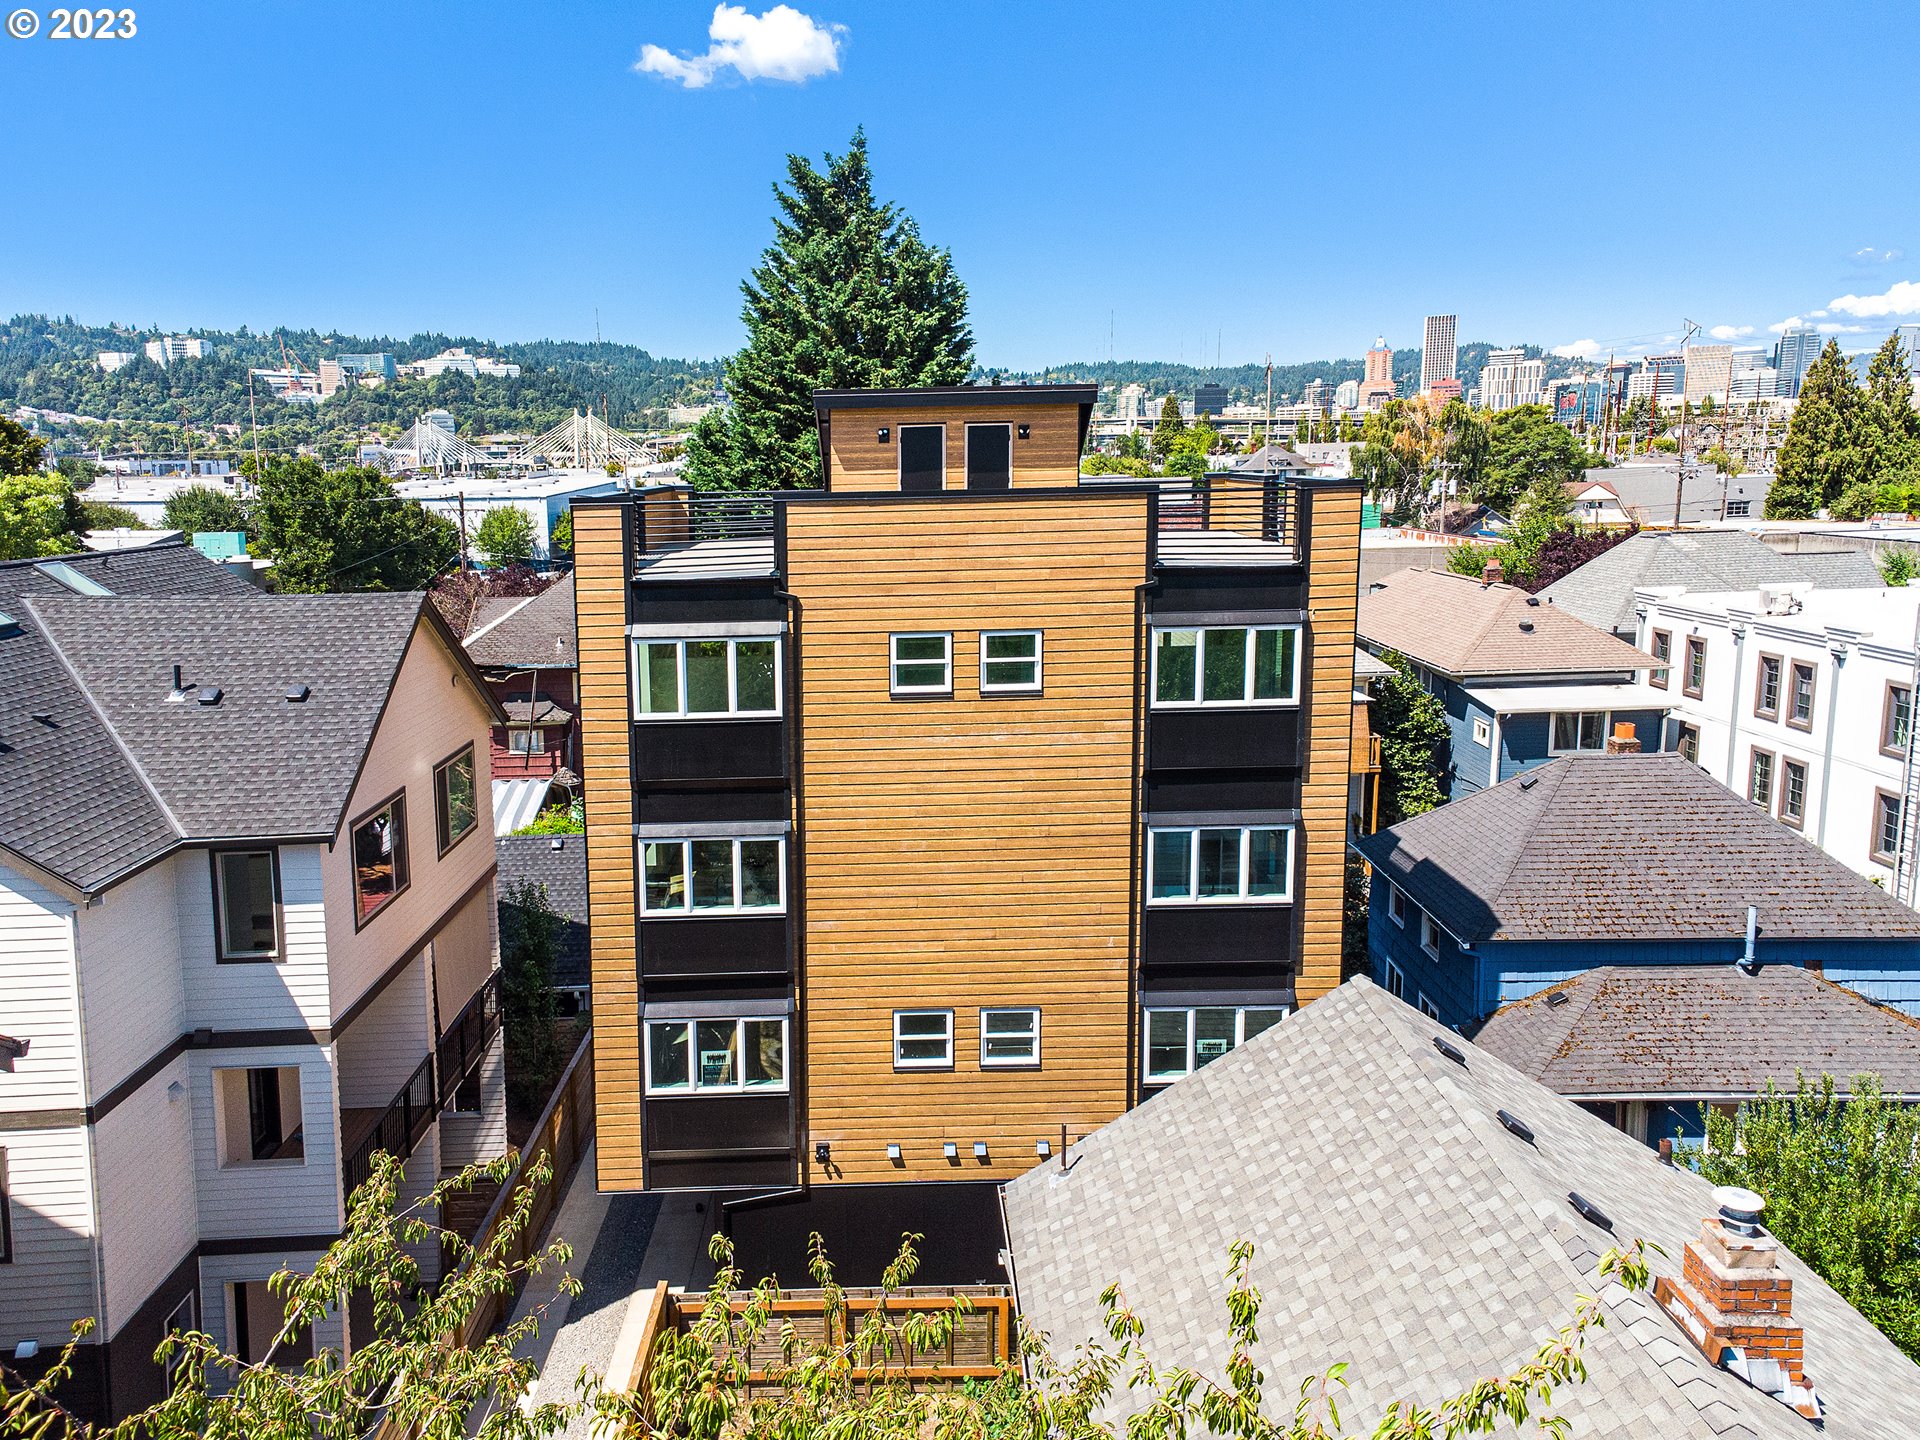 an aerial view of a residential apartment building